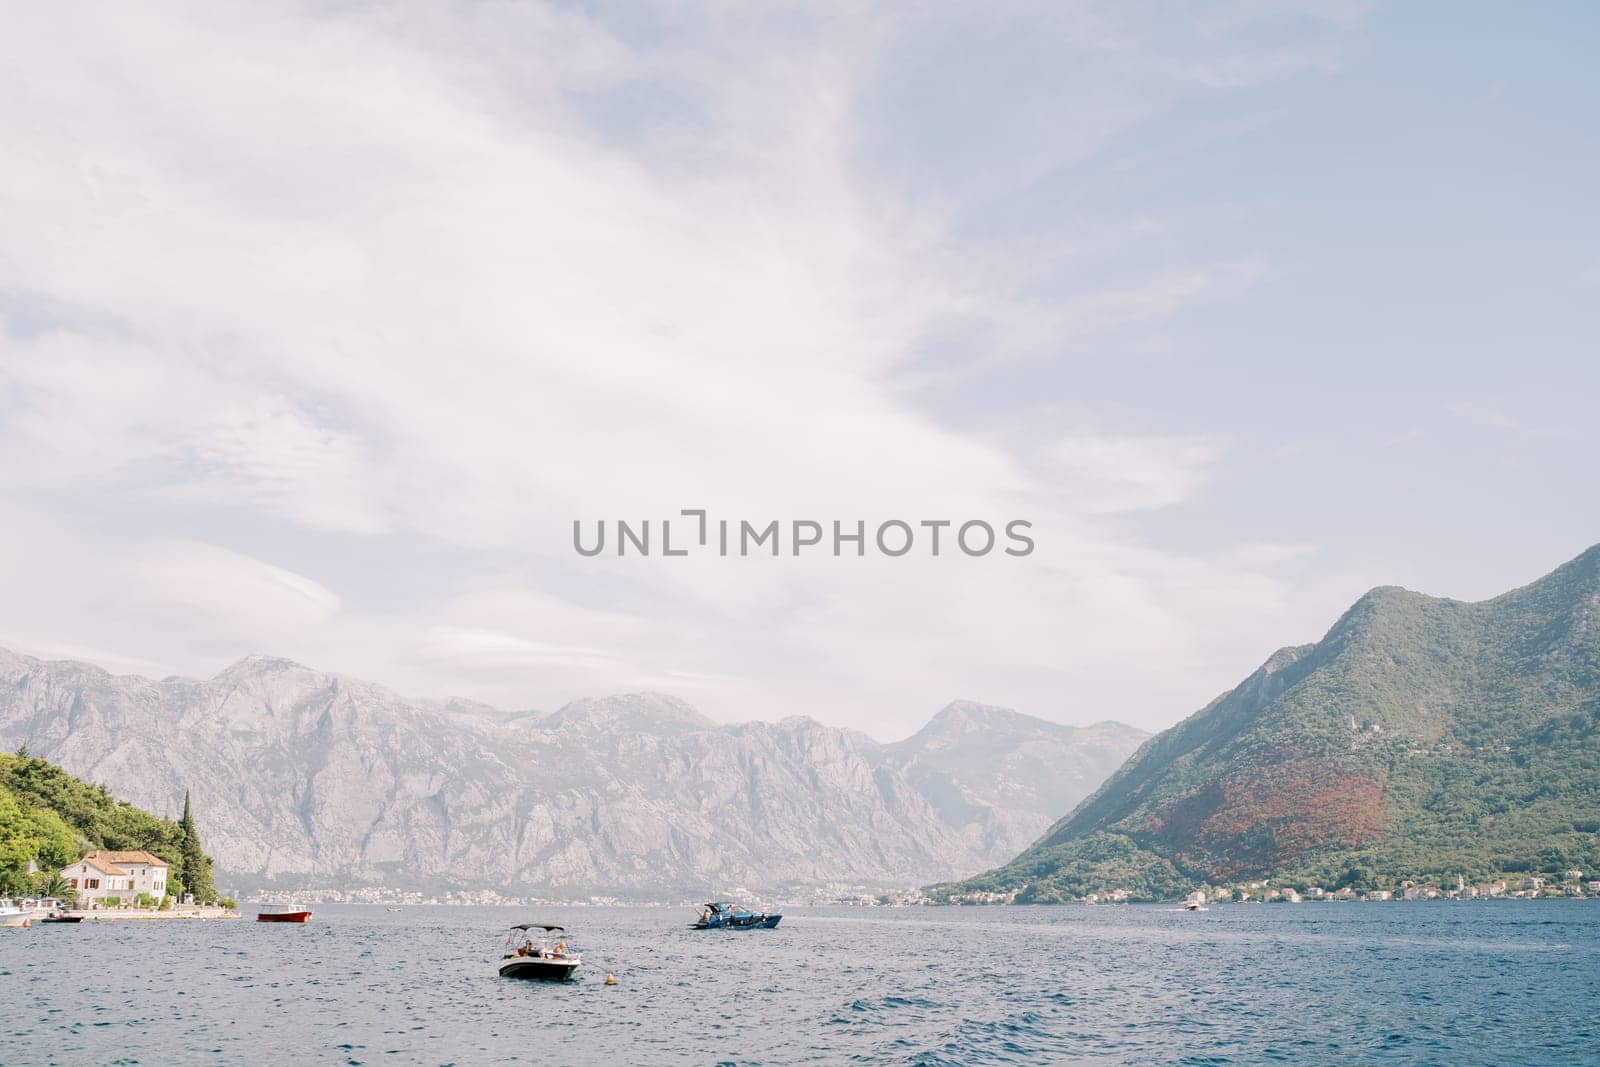 Motorboats sail along the Bay of Kotor against the backdrop of green mountains. Montenegro by Nadtochiy